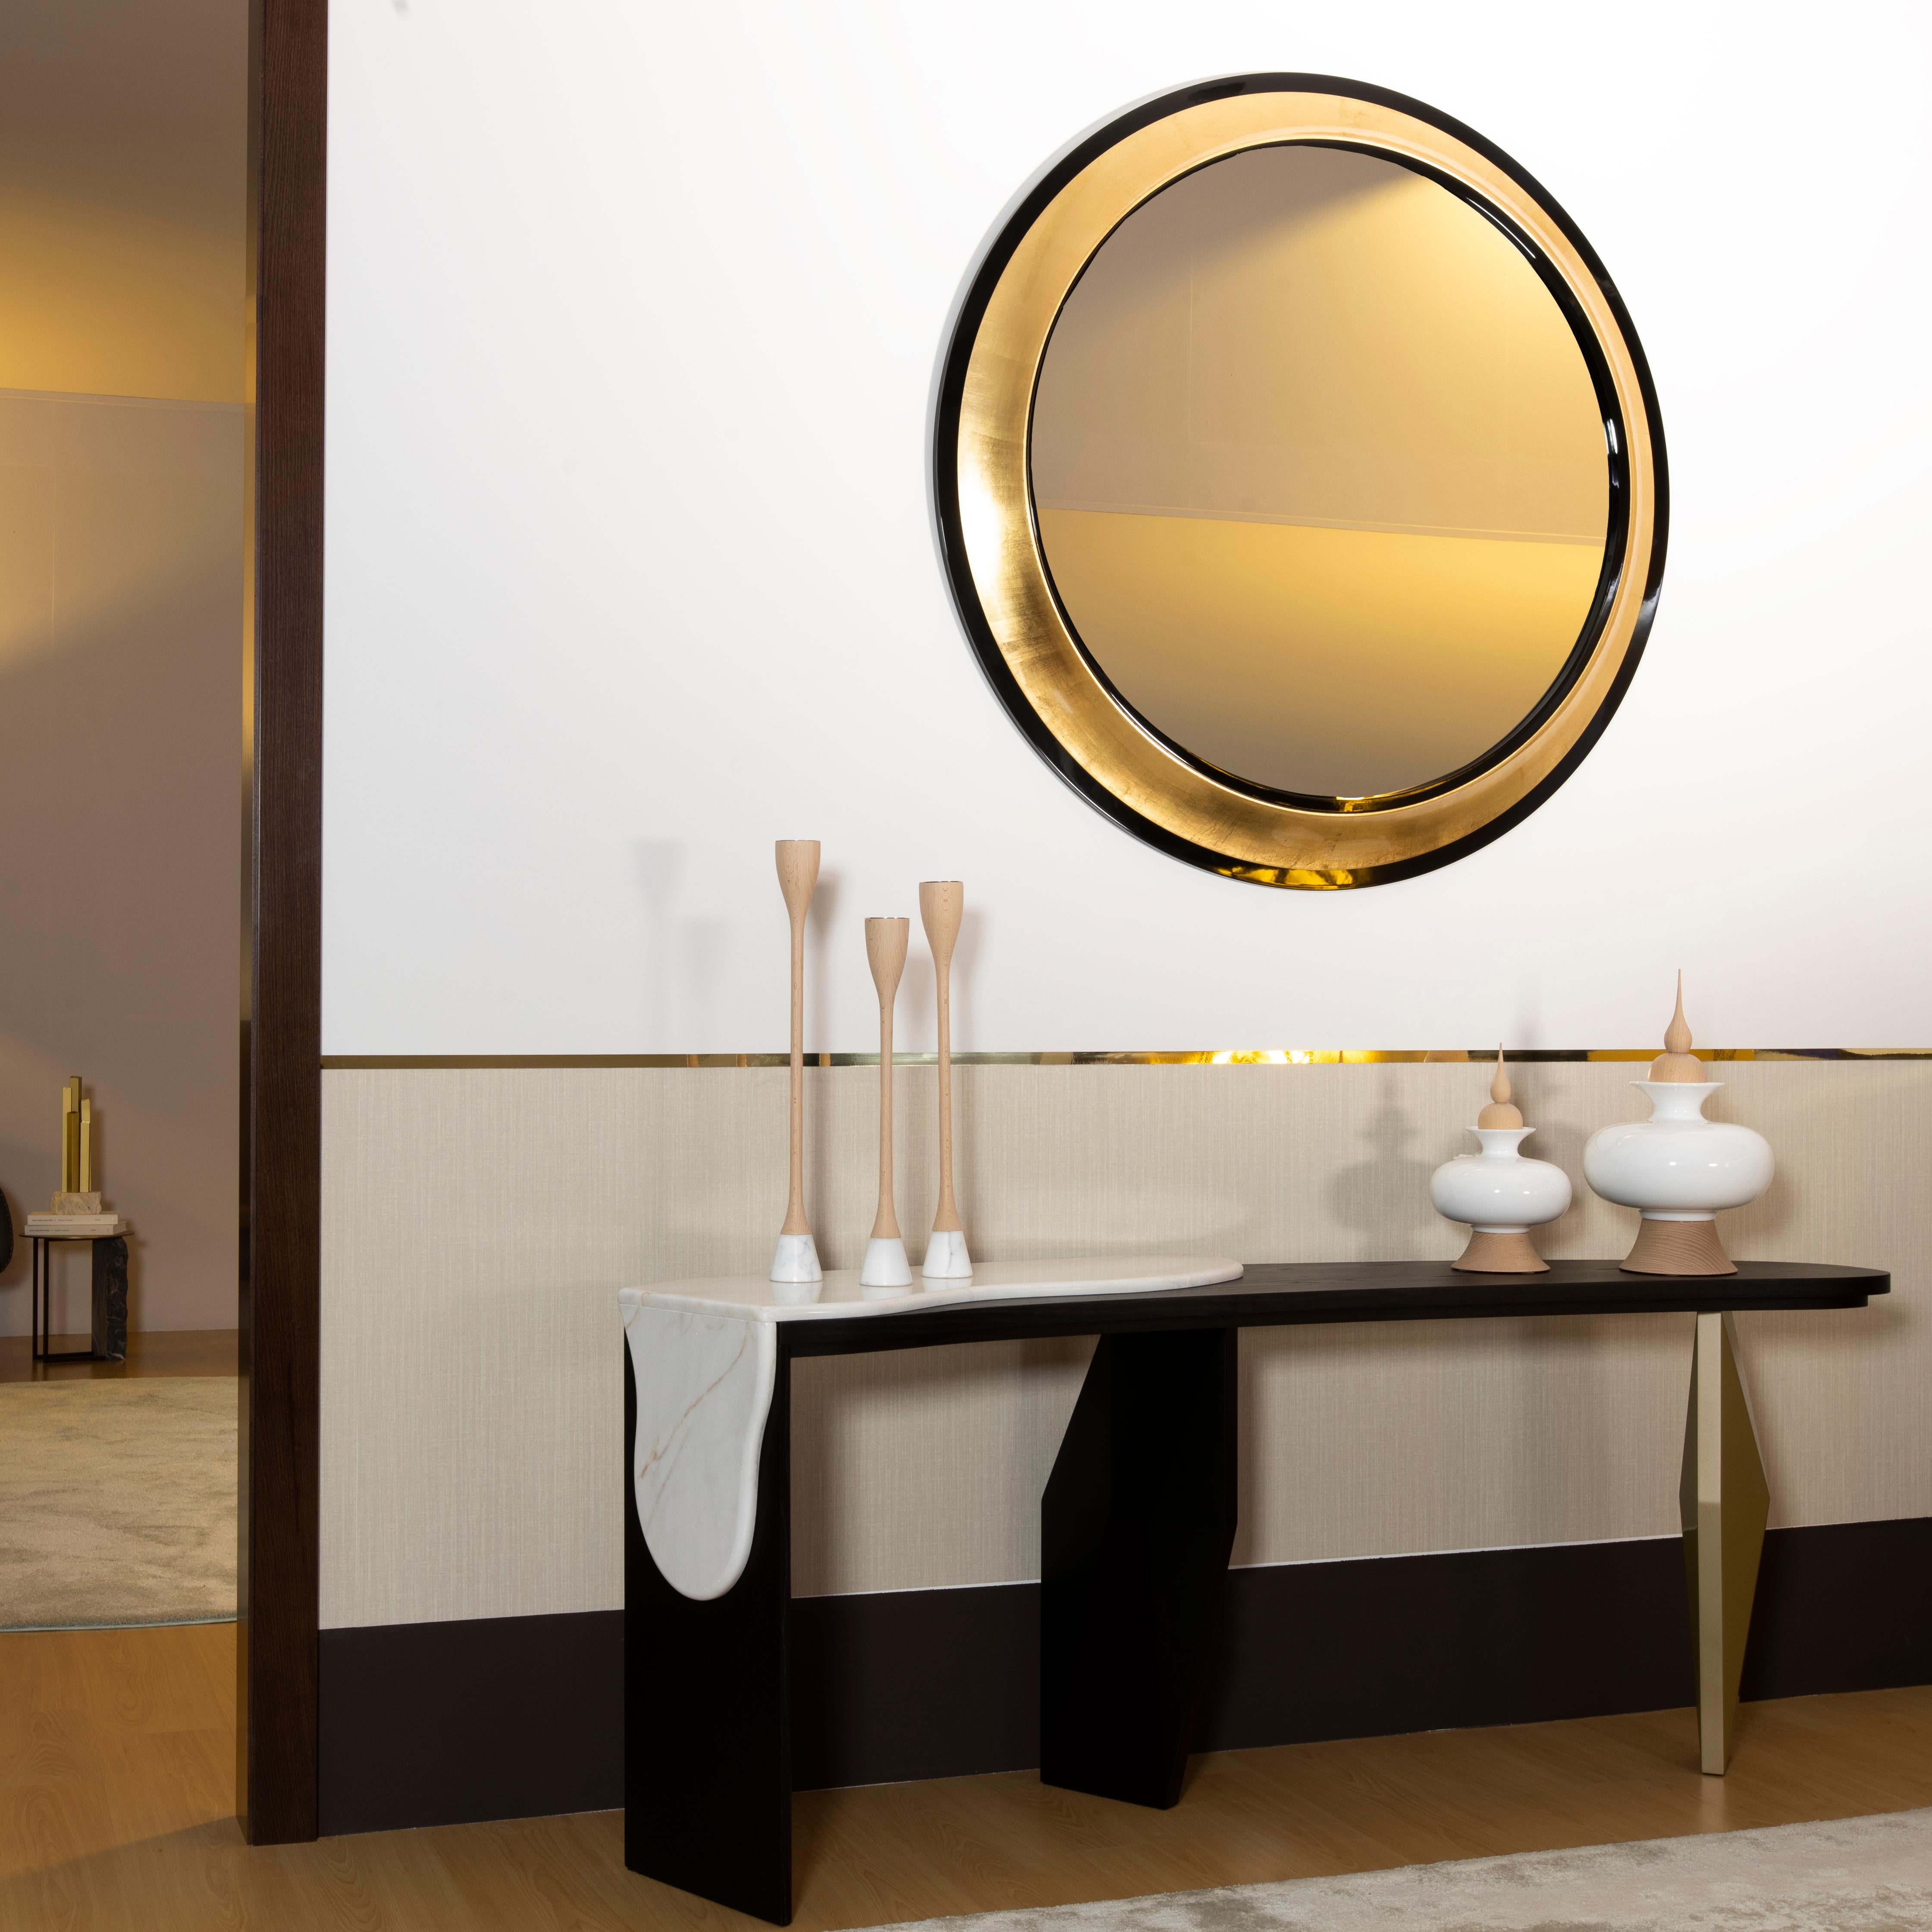 Grifo Wall Mirror, Modern Collection, Handcrafted in Portugal - Europe by GF Modern.

Grifo is a round mirror in a classical style that reflects his graceful personality. The vivid contrast between the two black rings and the central ring of